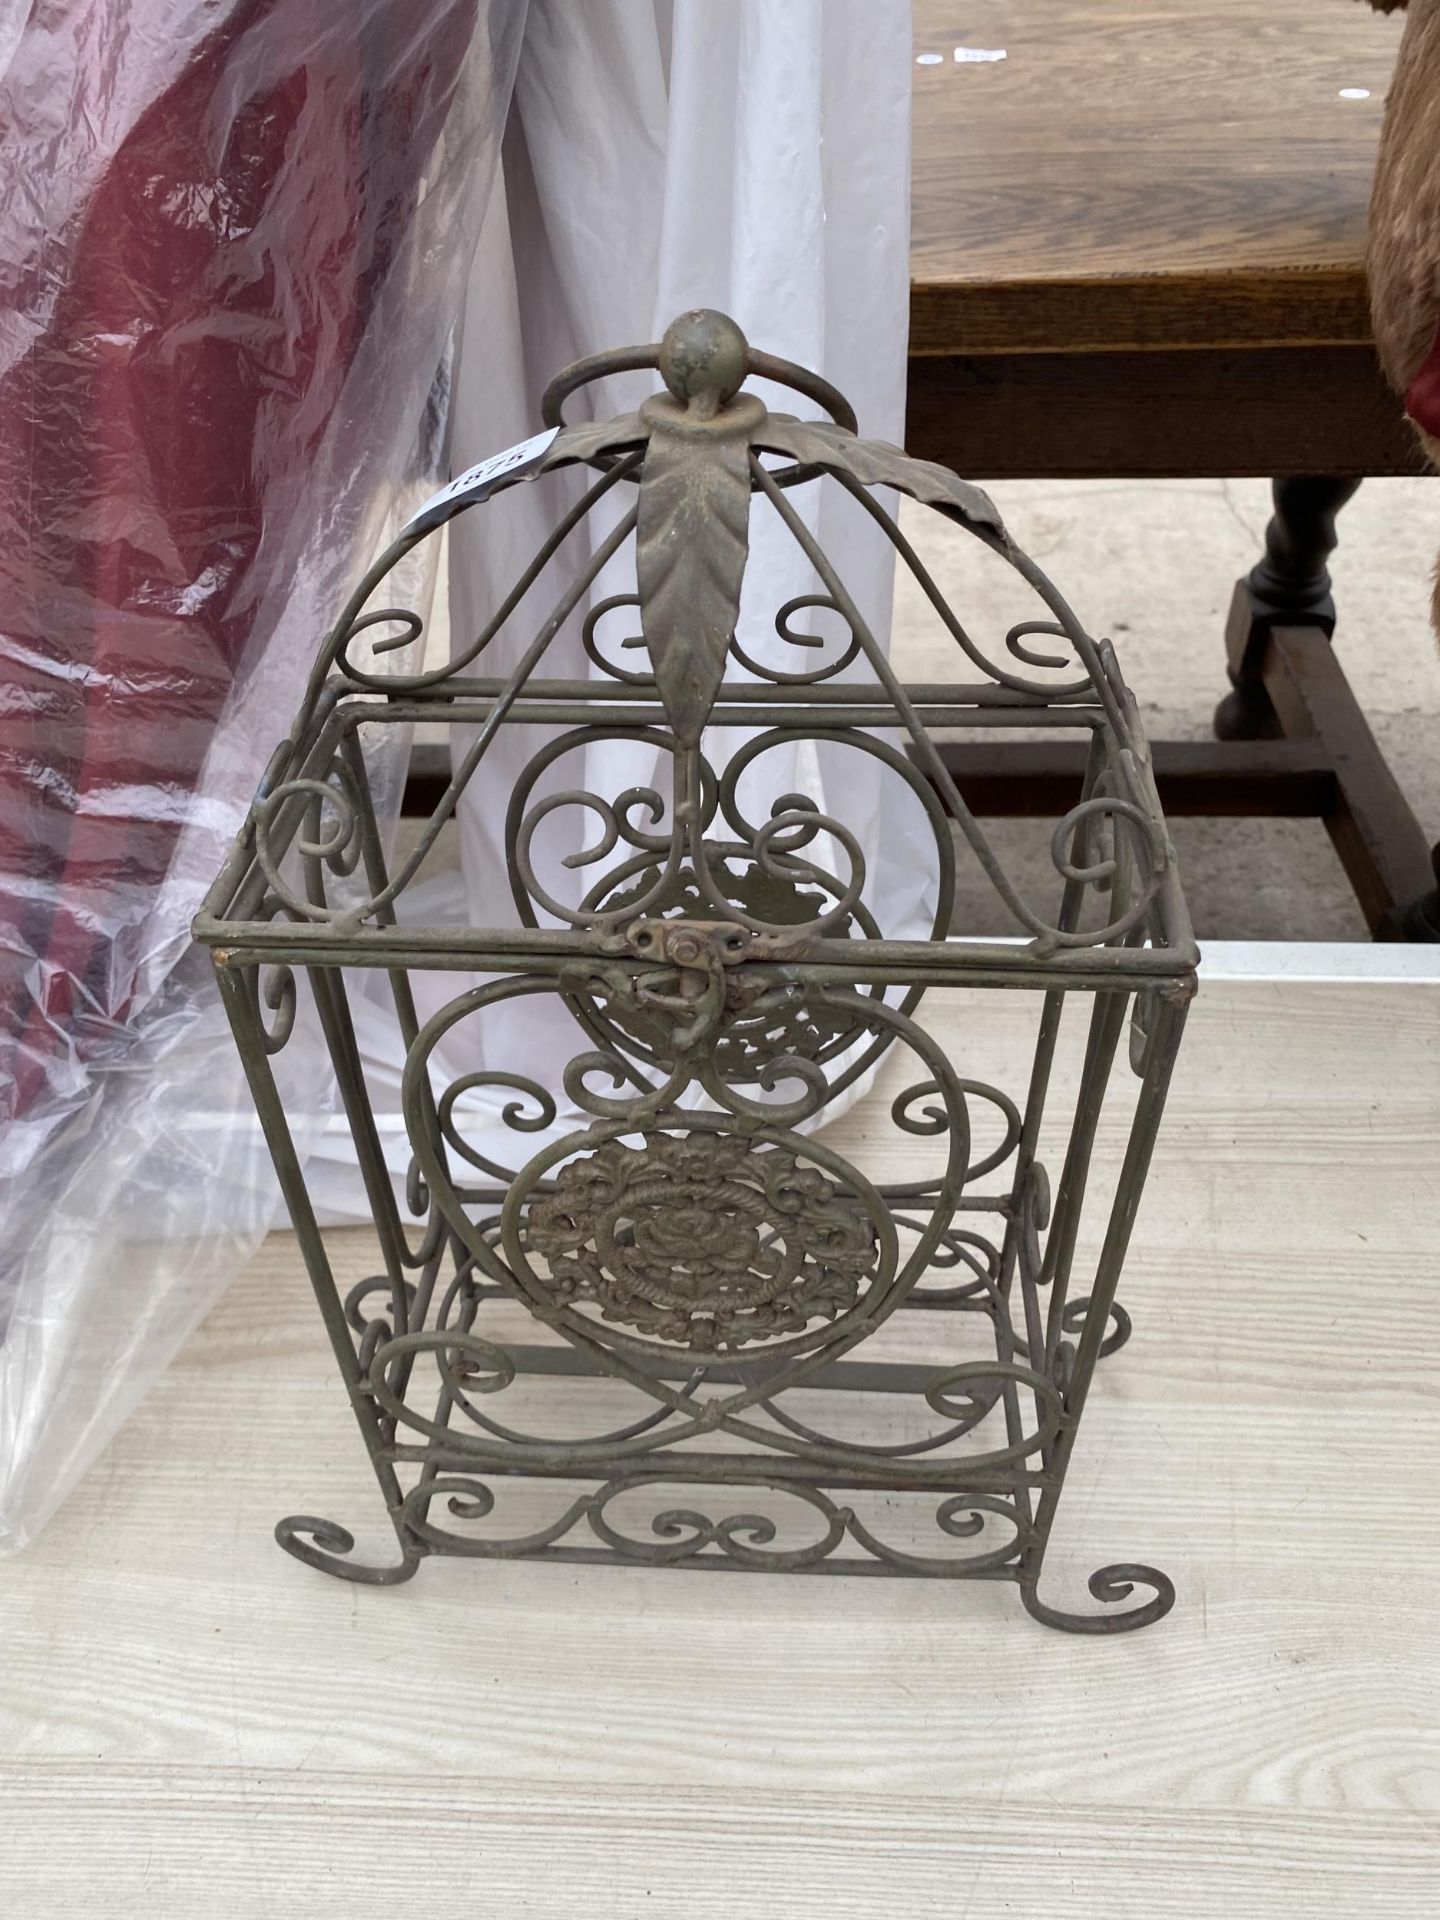 A DECORATIVE METAL TWO WINE BOTTLE HOLDER